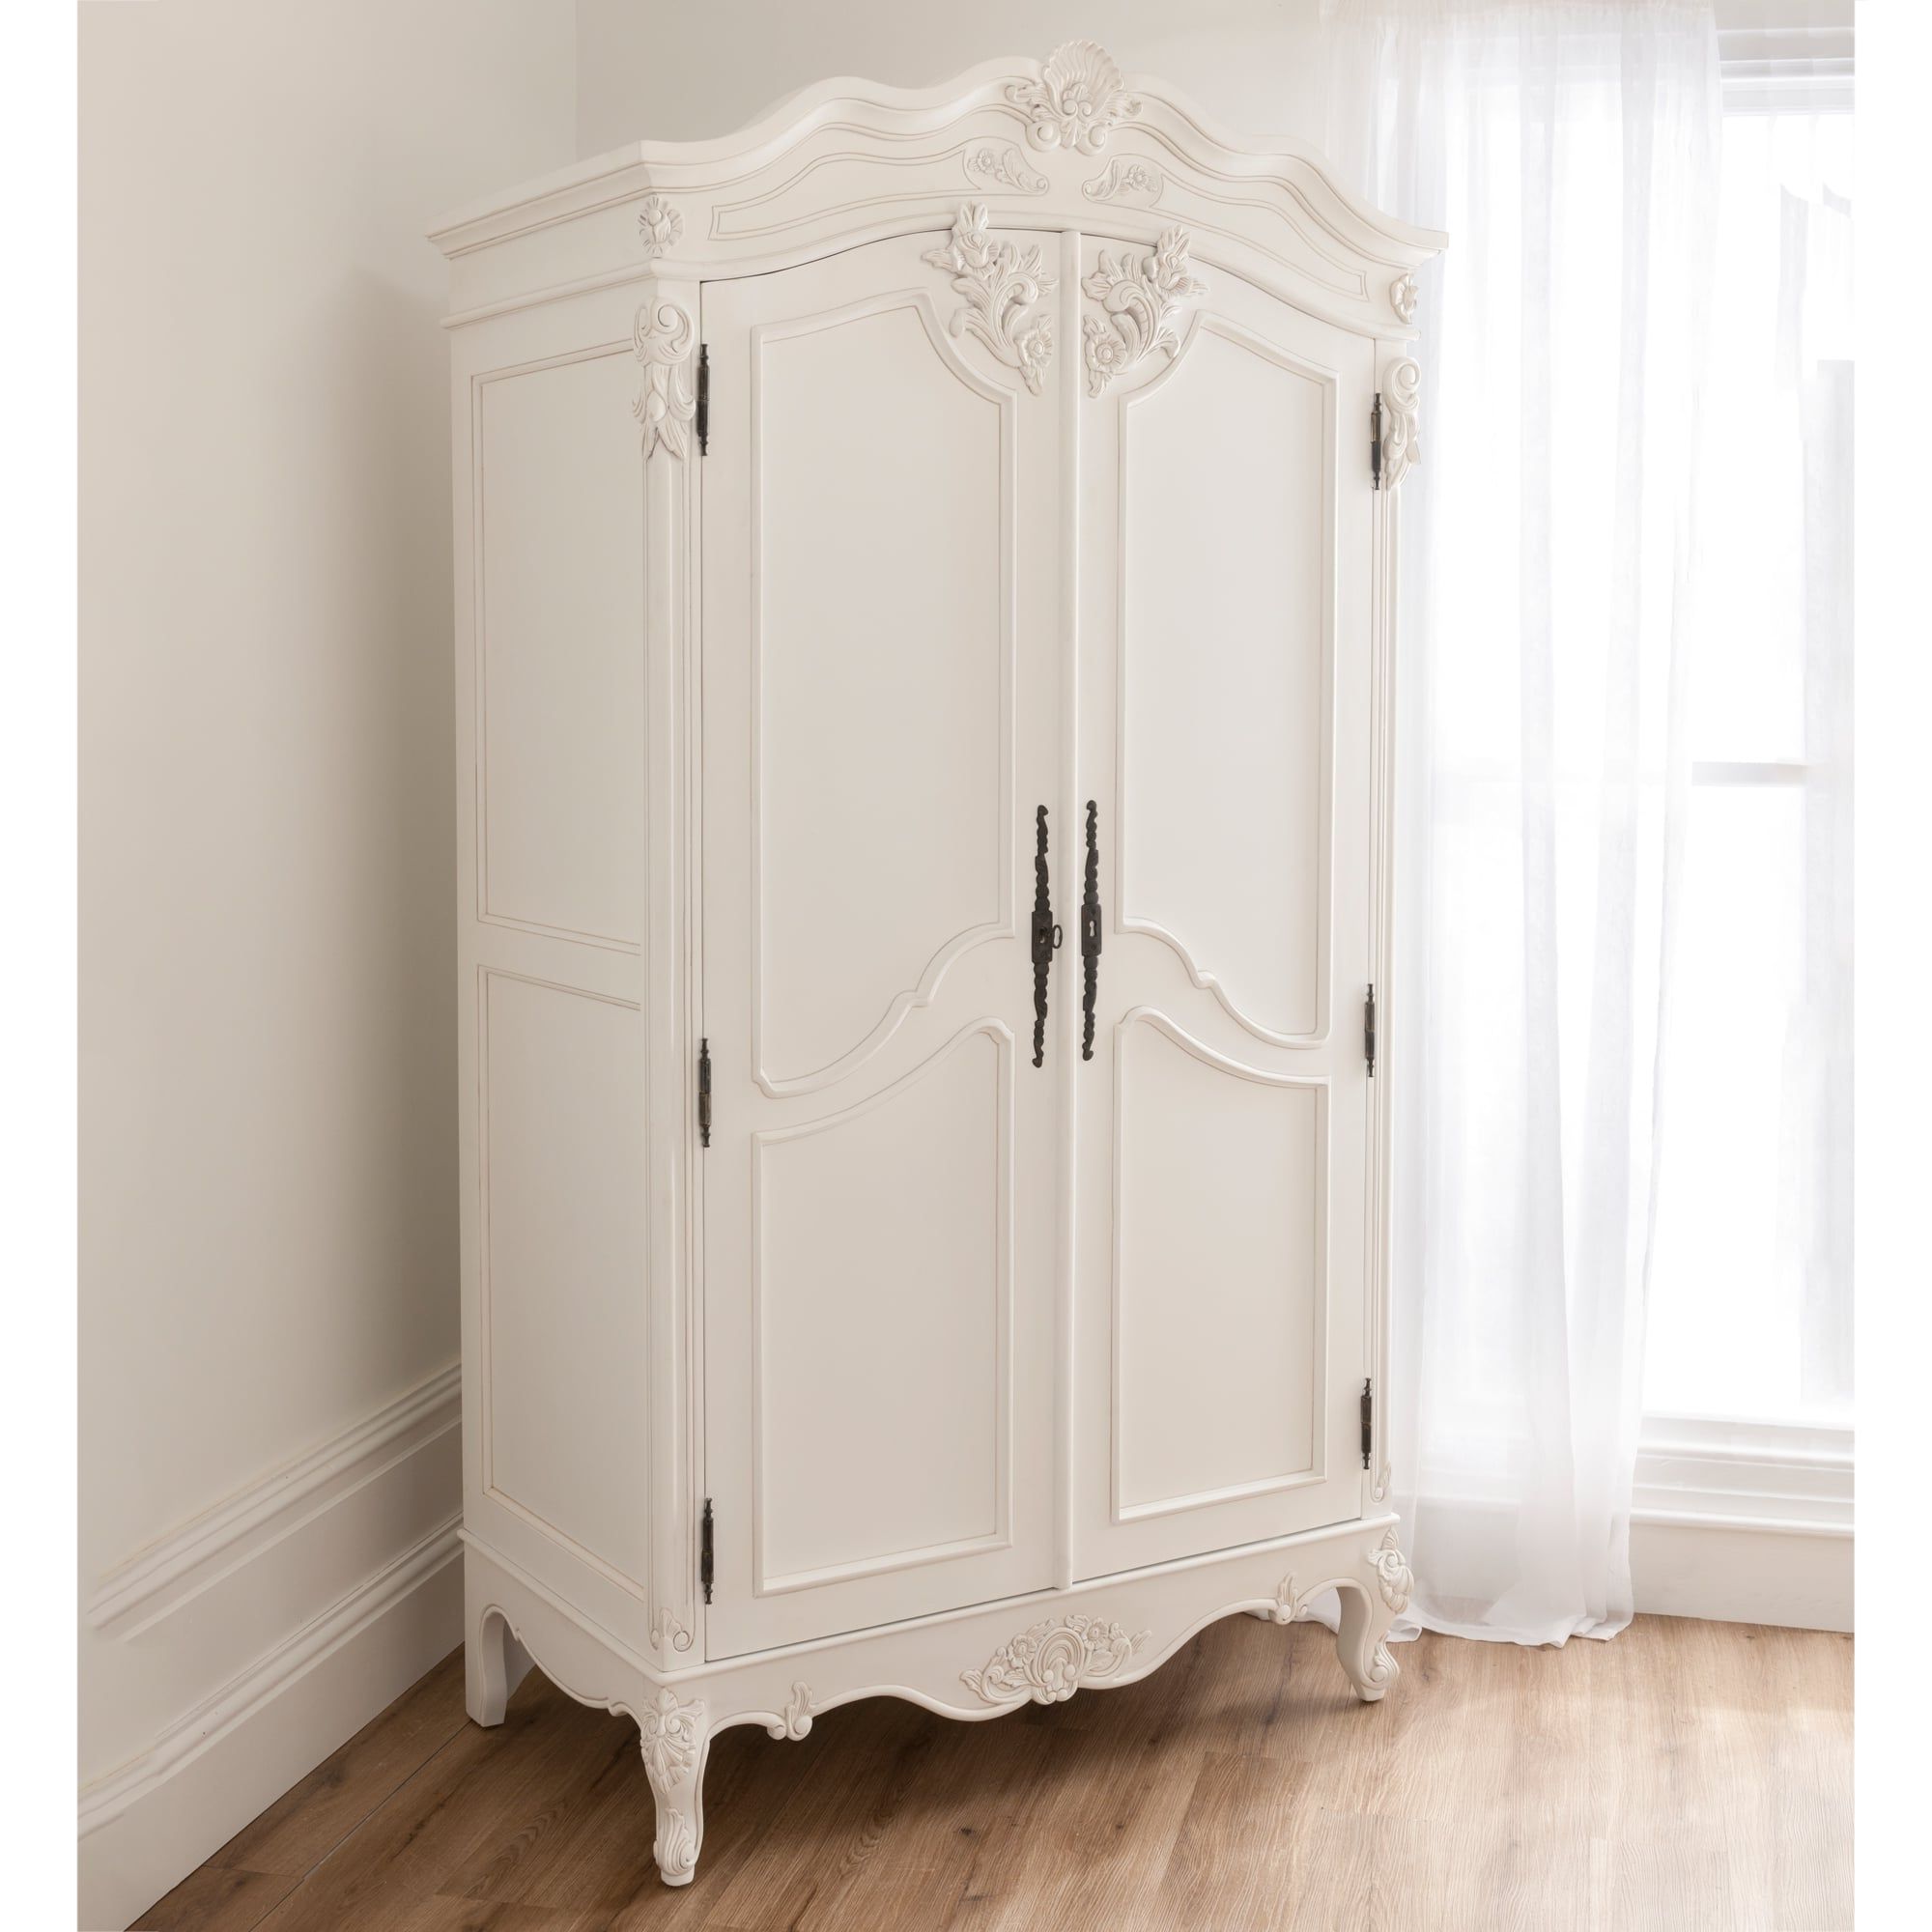 Baroque Antique French Wardrobe Is Available Online At Homesdirect365 Throughout Antique Style Wardrobes (View 6 of 20)